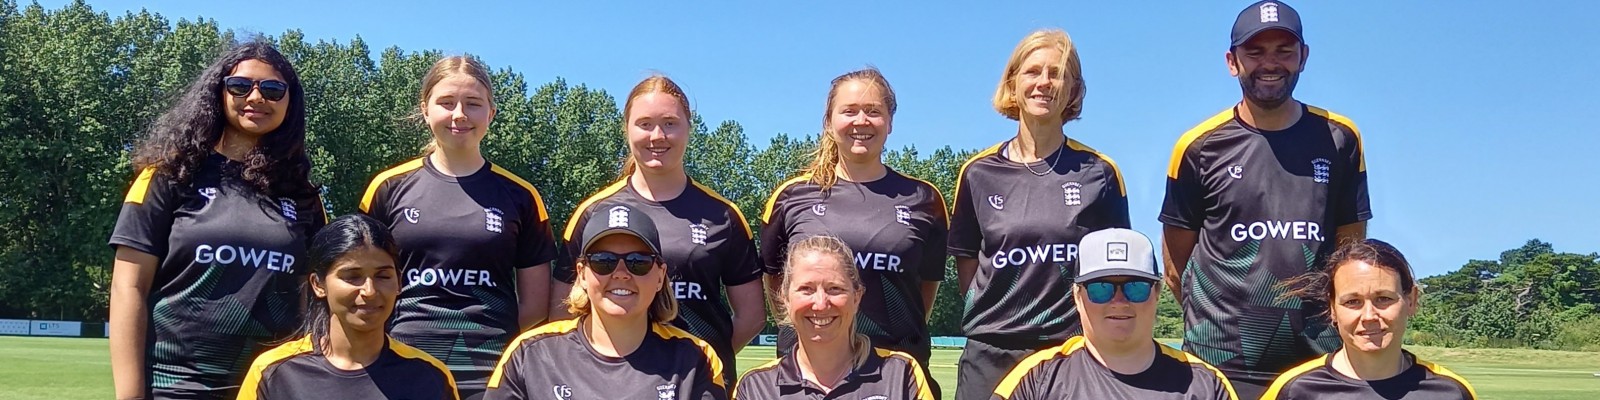 Guernsey Women’s Cricket Team wear their new kit & take part in the Queen’s Baton Relay